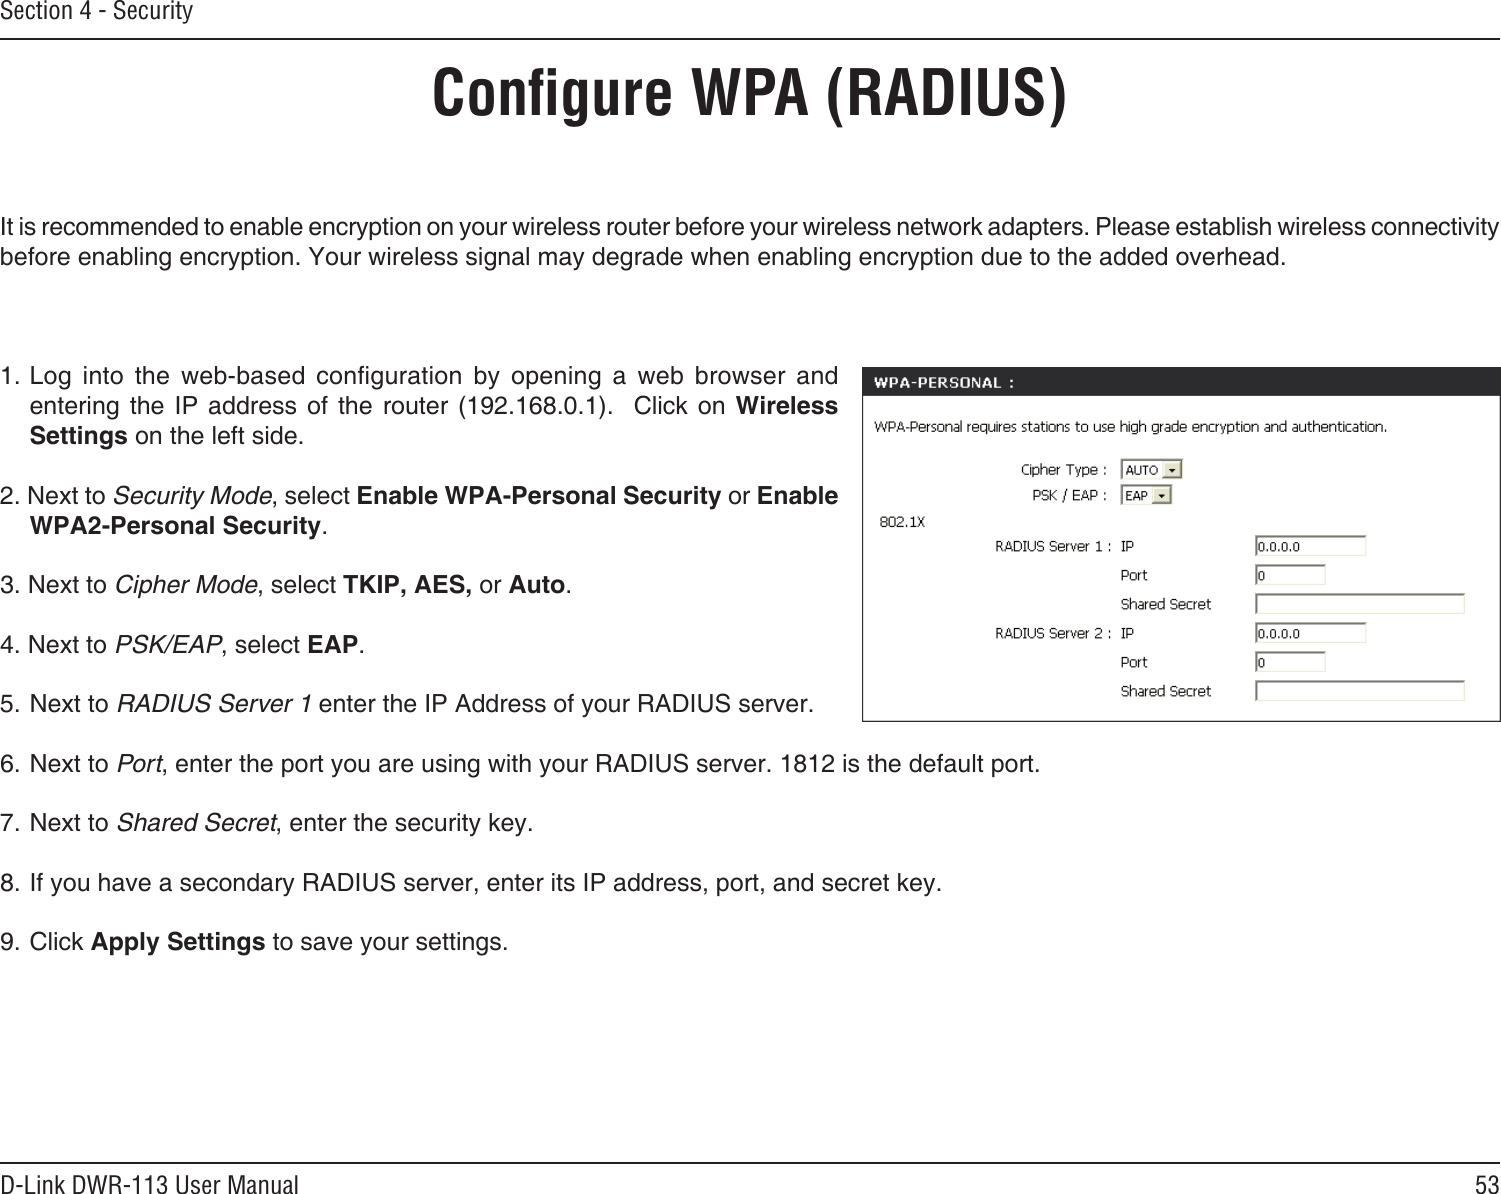 53D-Link DWR-113 User ManualSection 4 - SecurityConﬁgure WPA (RADIUS)It is recommended to enable encryption on your wireless router before your wireless network adapters. Please establish wireless connectivity before enabling encryption. Your wireless signal may degrade when enabling encryption due to the added overhead.1. Log  into  the  web-based  conguration  by  opening  a  web  browser  and entering  the  IP address  of  the router  (192.168.0.1).    Click  on Wireless Settings on the left side.2. Next to Security Mode, select Enable WPA-Personal Security or Enable WPA2-Personal Security.3. Next to Cipher Mode, select TKIP, AES, or Auto.4. Next to PSK/EAP, select EAP.5. Next to RADIUS Server 1 enter the IP Address of your RADIUS server.6. Next to Port, enter the port you are using with your RADIUS server. 1812 is the default port.7. Next to Shared Secret, enter the security key.8. If you have a secondary RADIUS server, enter its IP address, port, and secret key.9. Click Apply Settings to save your settings.